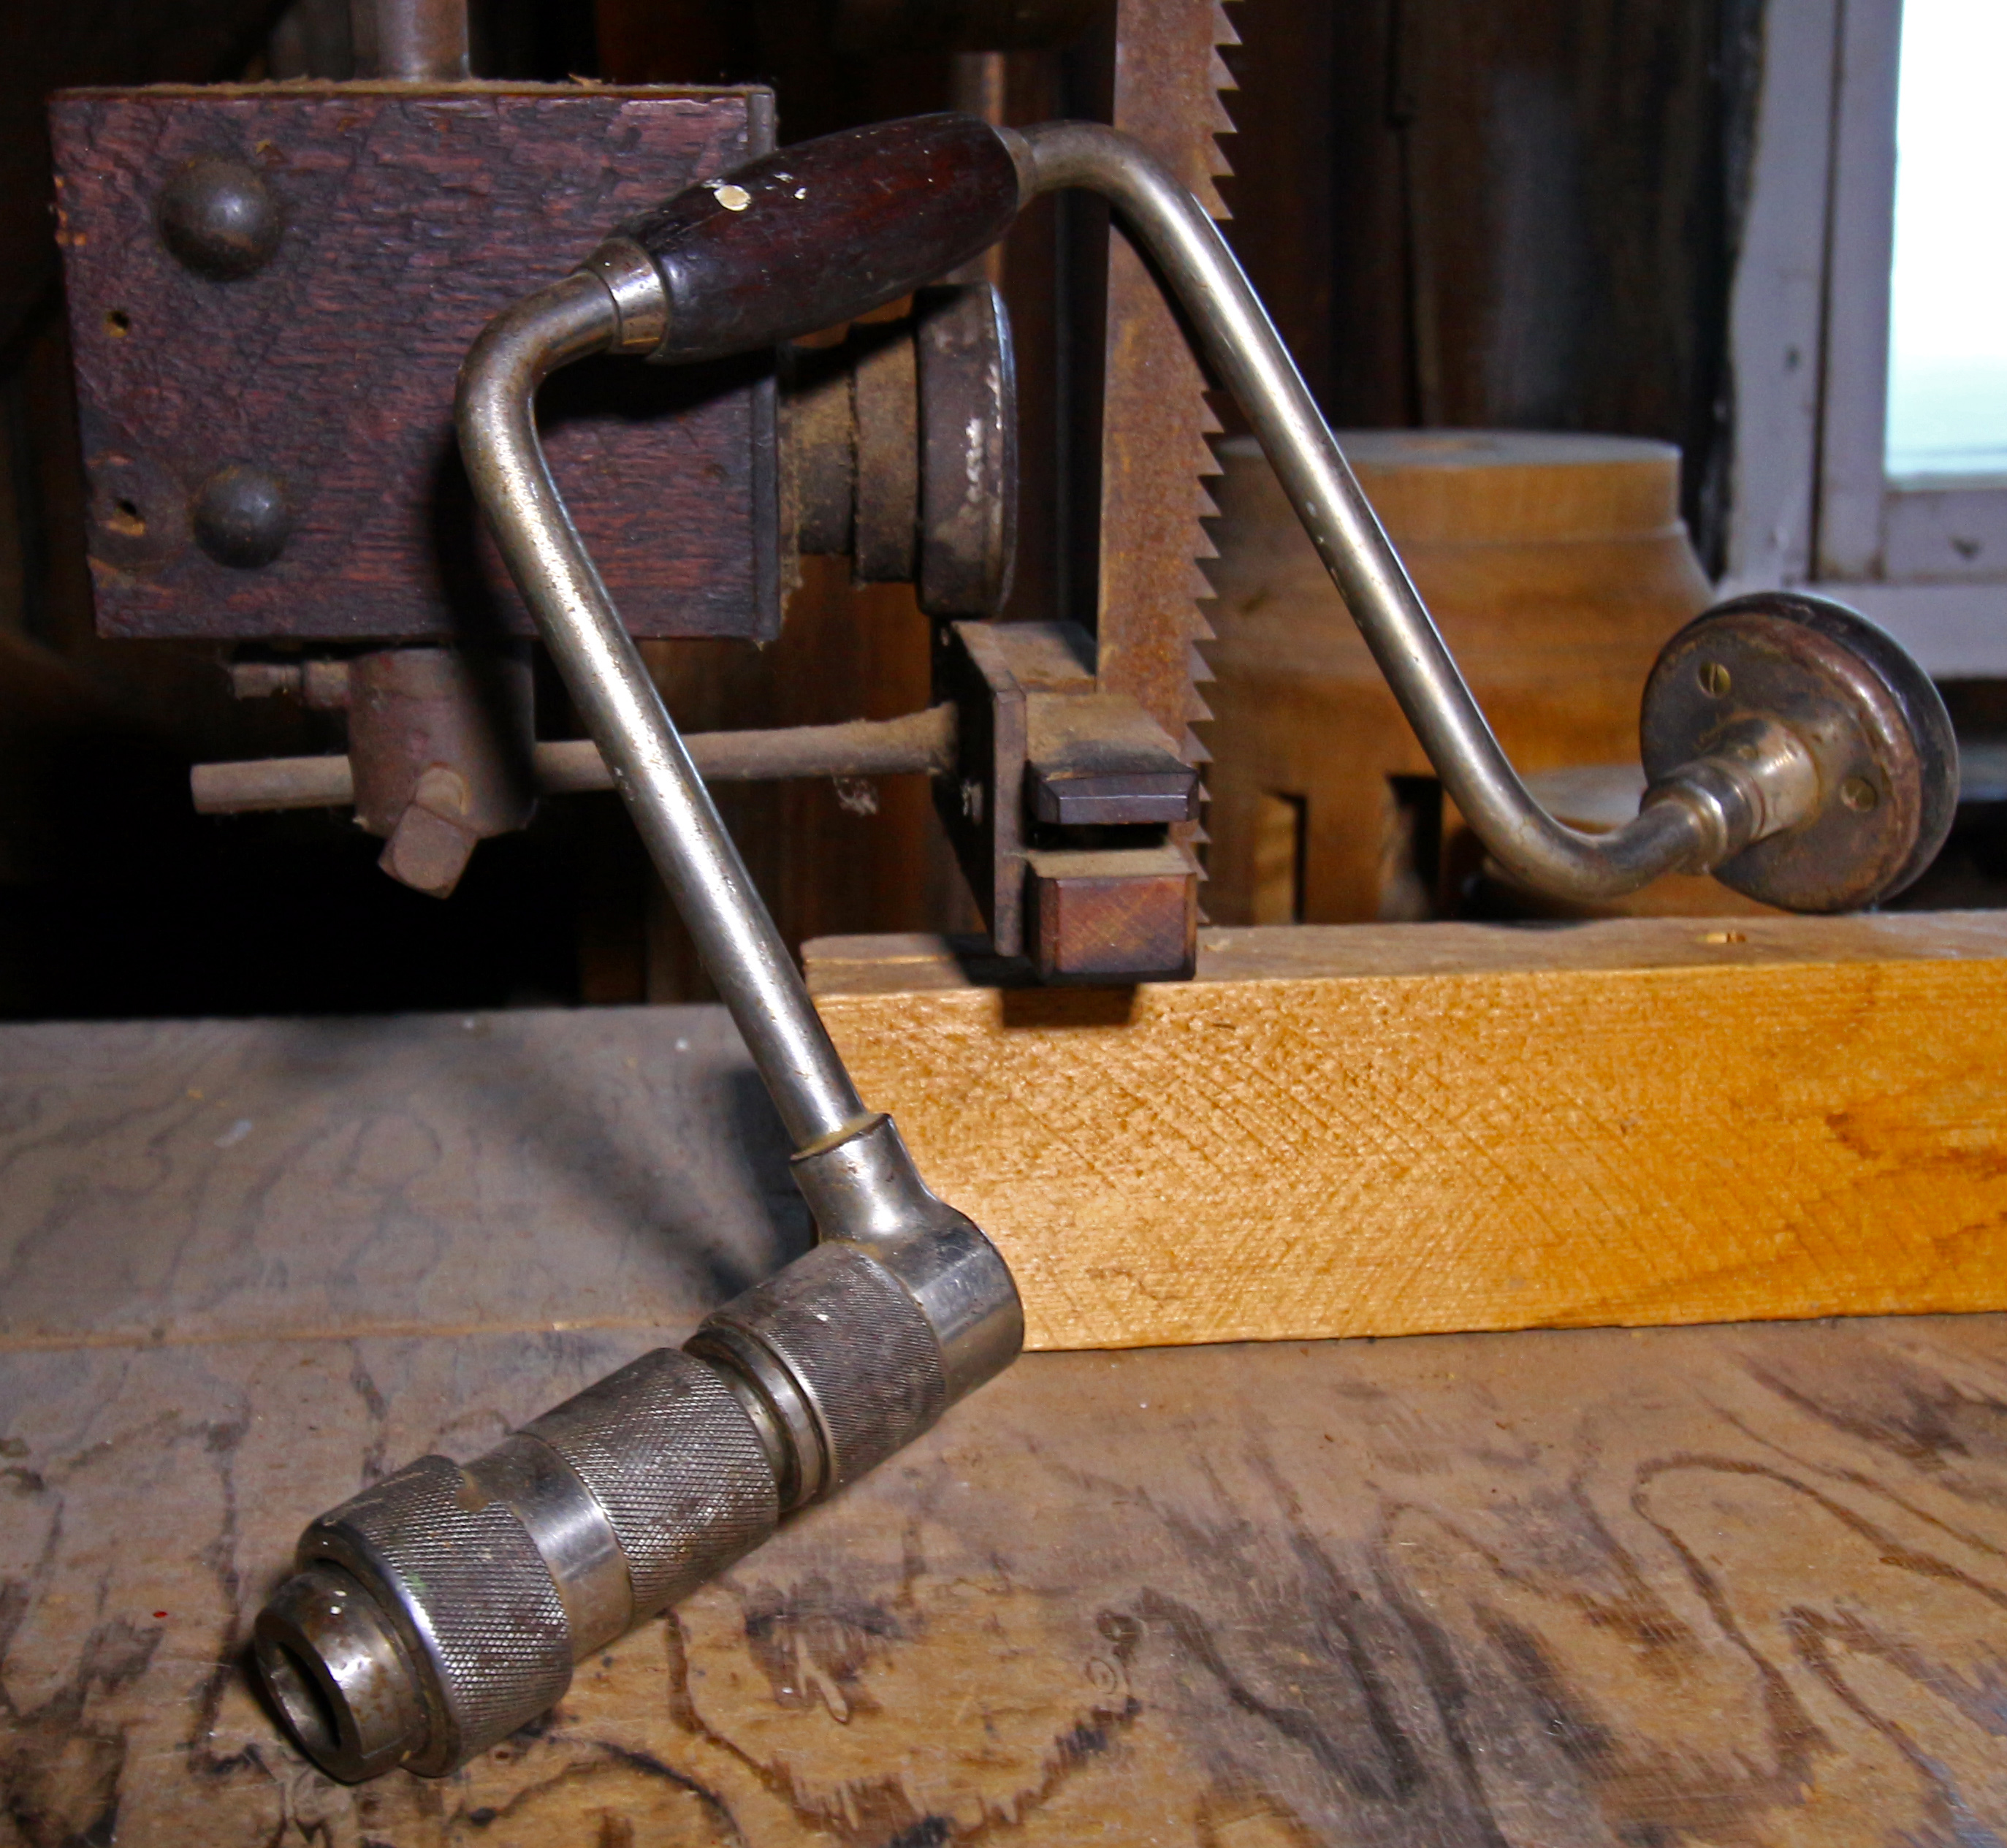 Close-up color photograph of a brace, made of metal with a wooden handle, set on a wooden workbench and leaning against a vintage band saw.